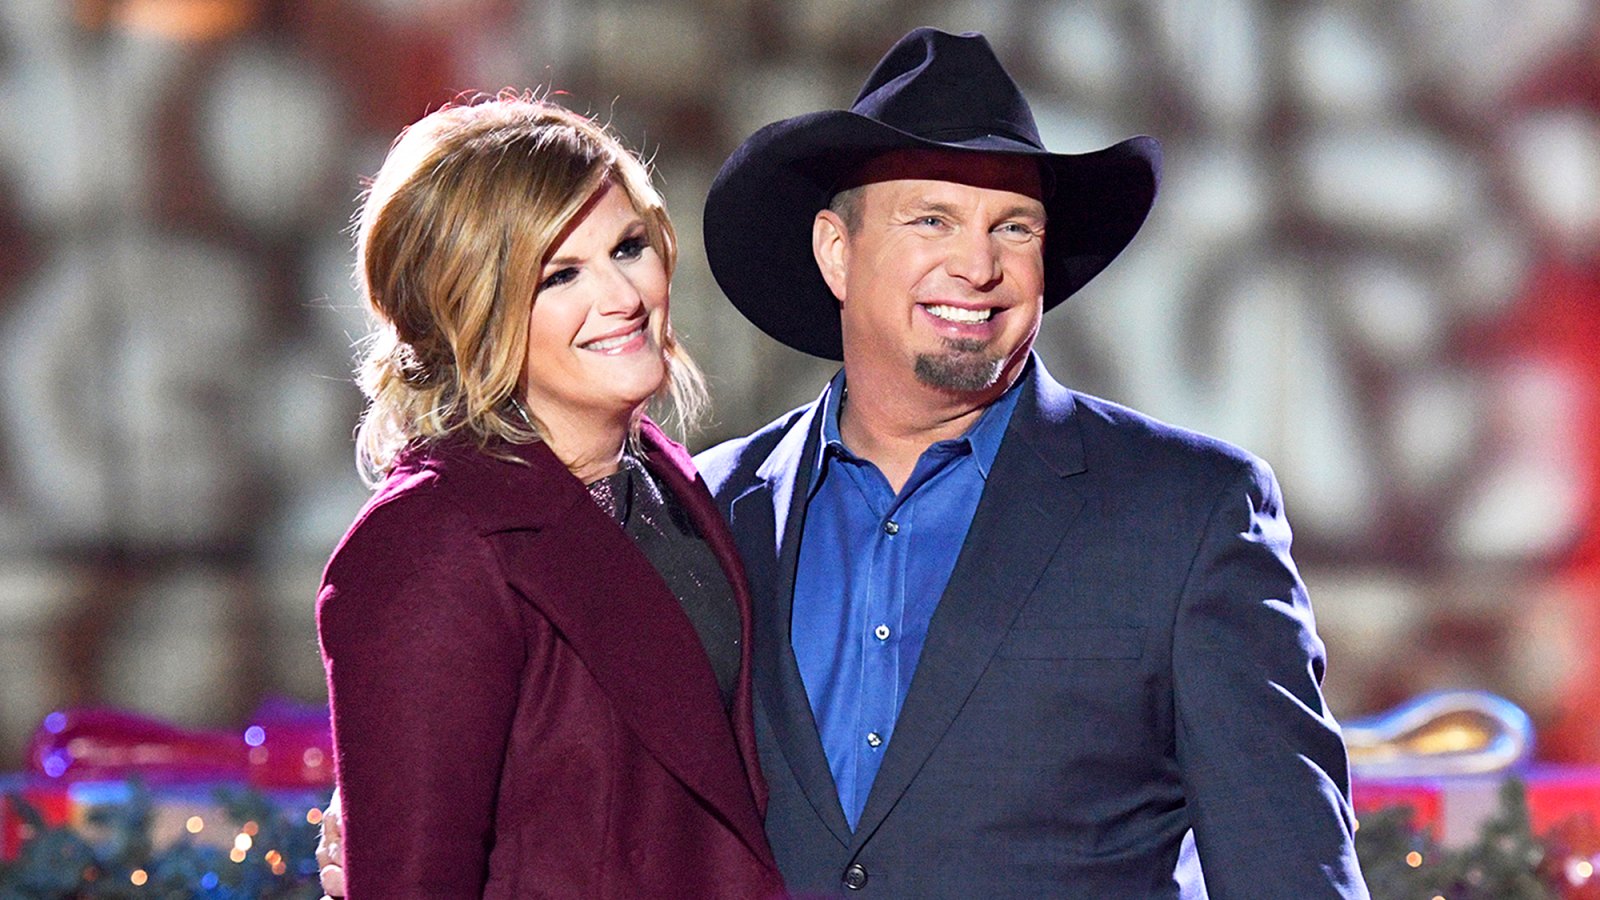 Trisha Yearwood and Garth Brooks attend the 2016 Christmas at Rockefeller Center in New York City.